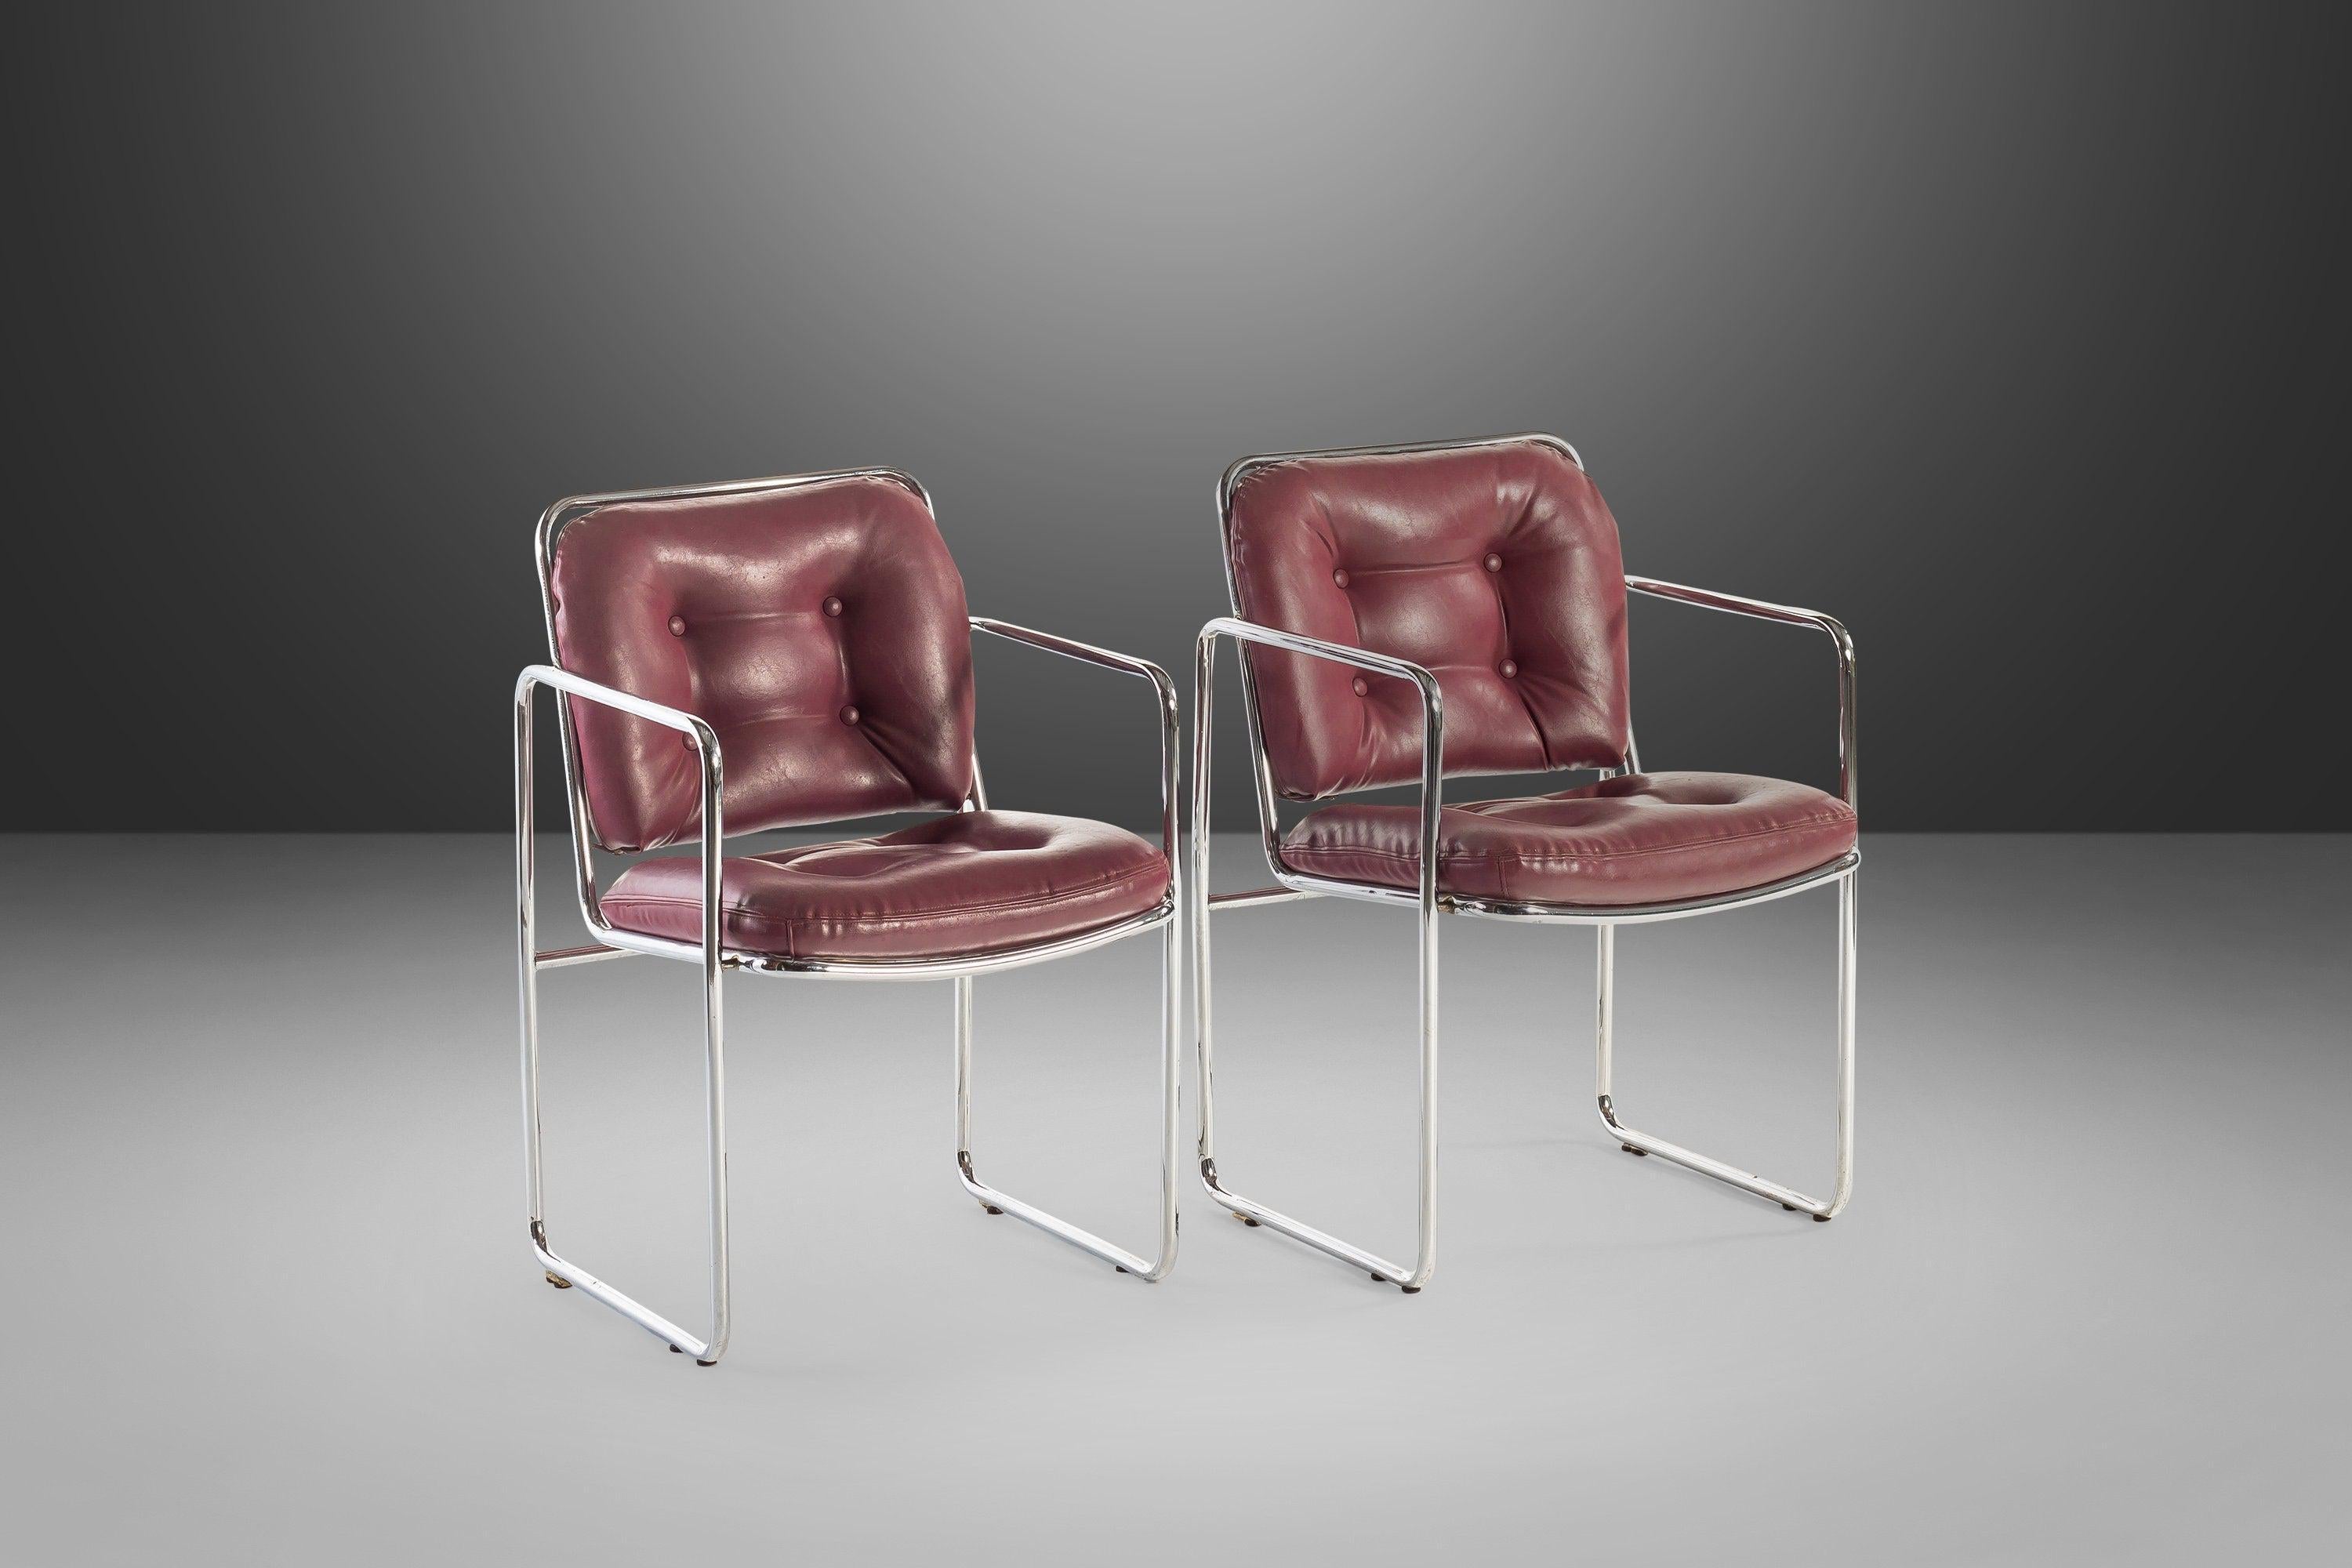 MCM Tubular Chrome Lounge Chairs by Chromcraft with Rich Oxblood Seats, c. 1960s For Sale 4